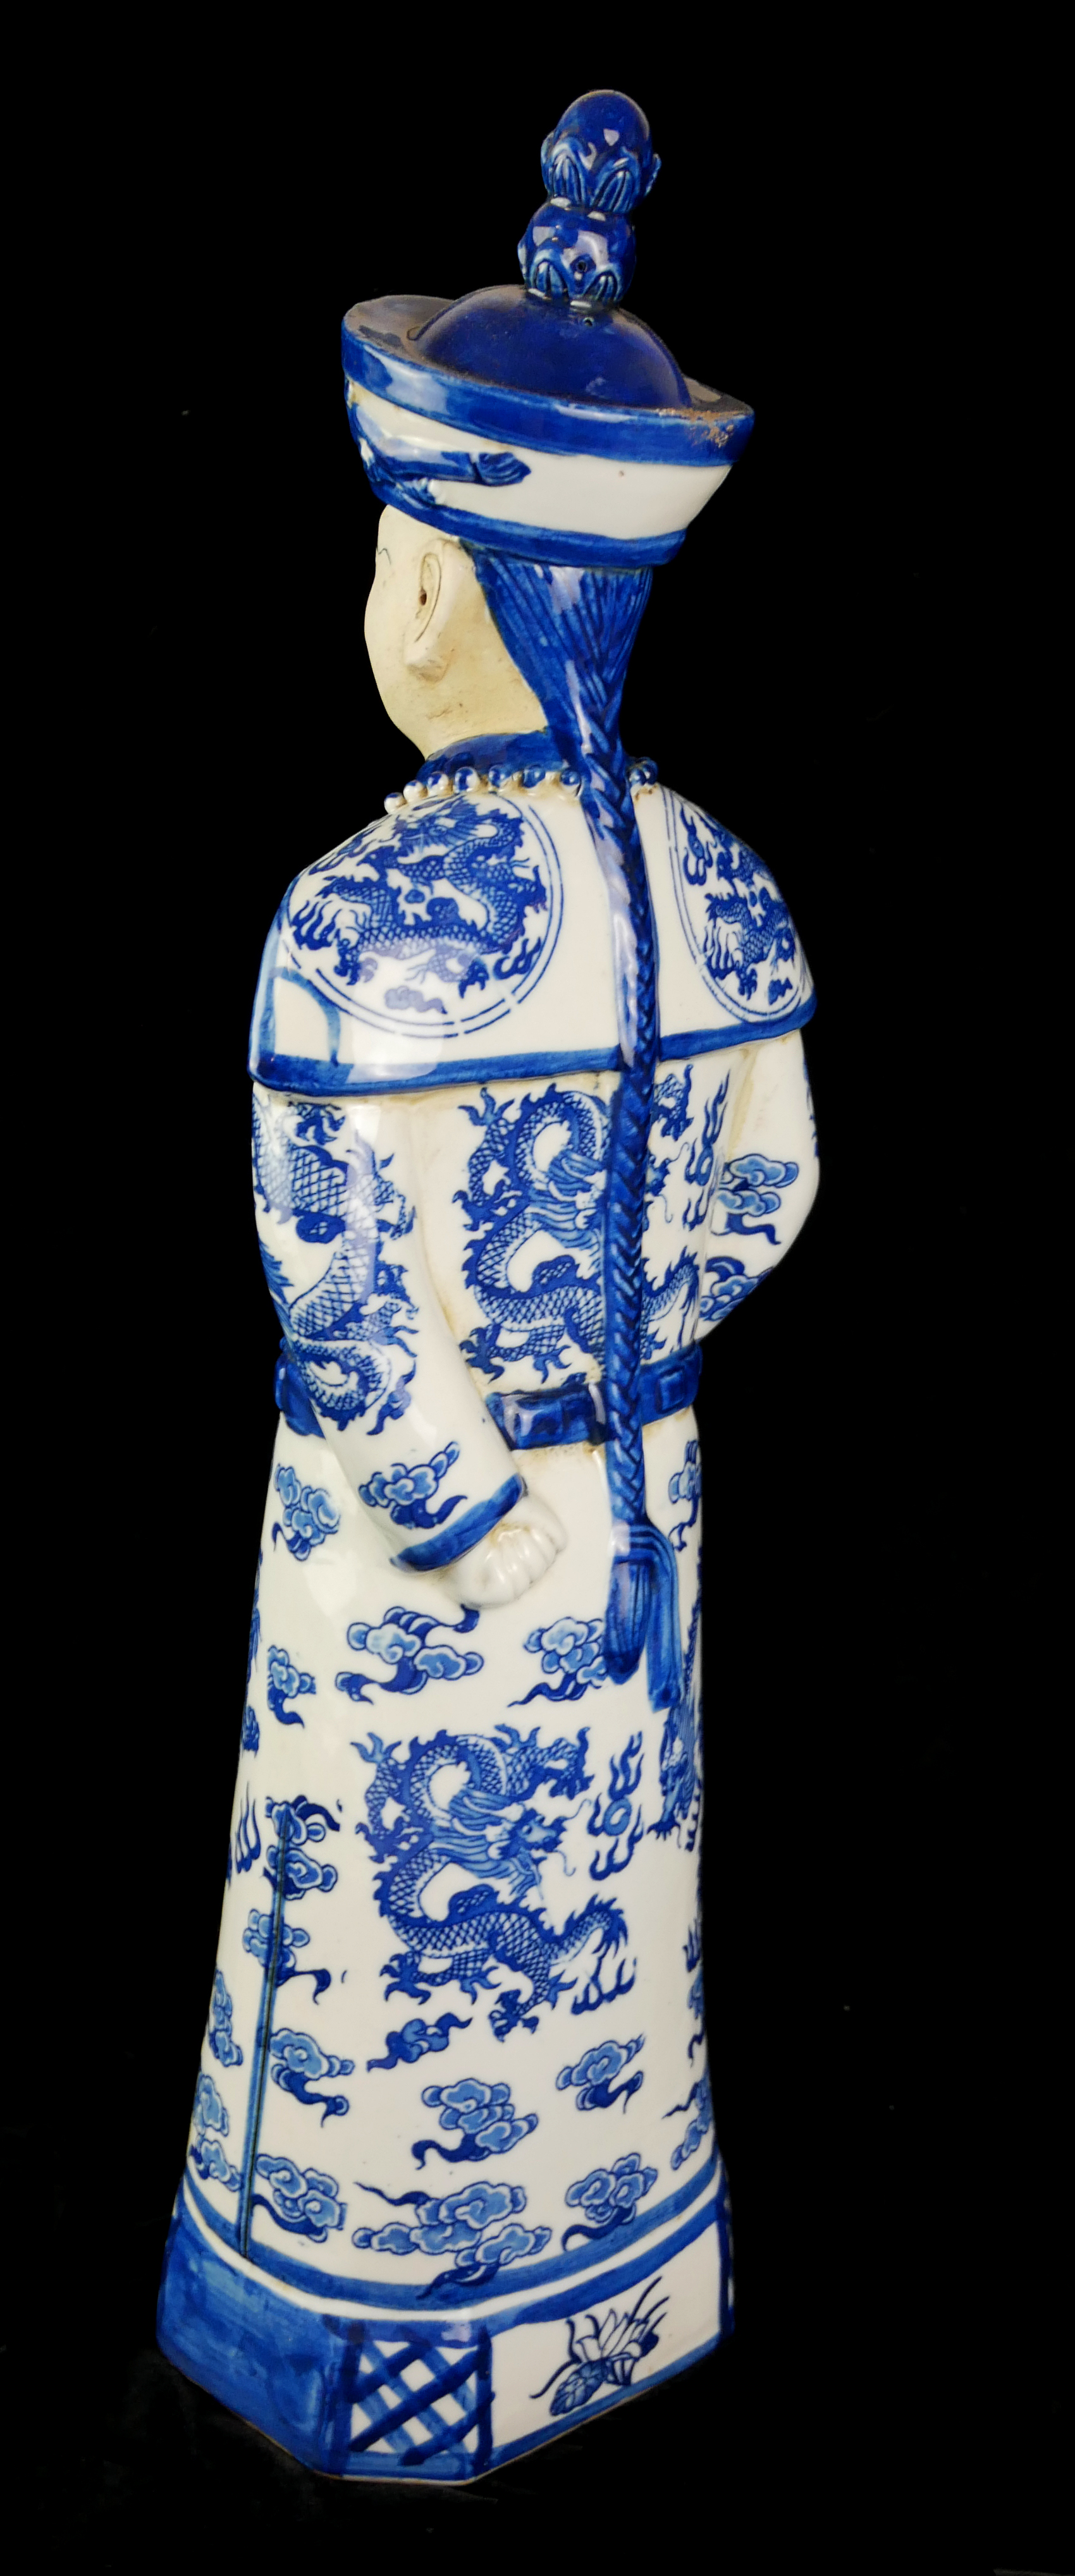 A CHINESE BLUE AND WHITE PORCELAIN EMPEROR FIGURE Standing pose wearing a robe with opposing dragons - Image 2 of 3